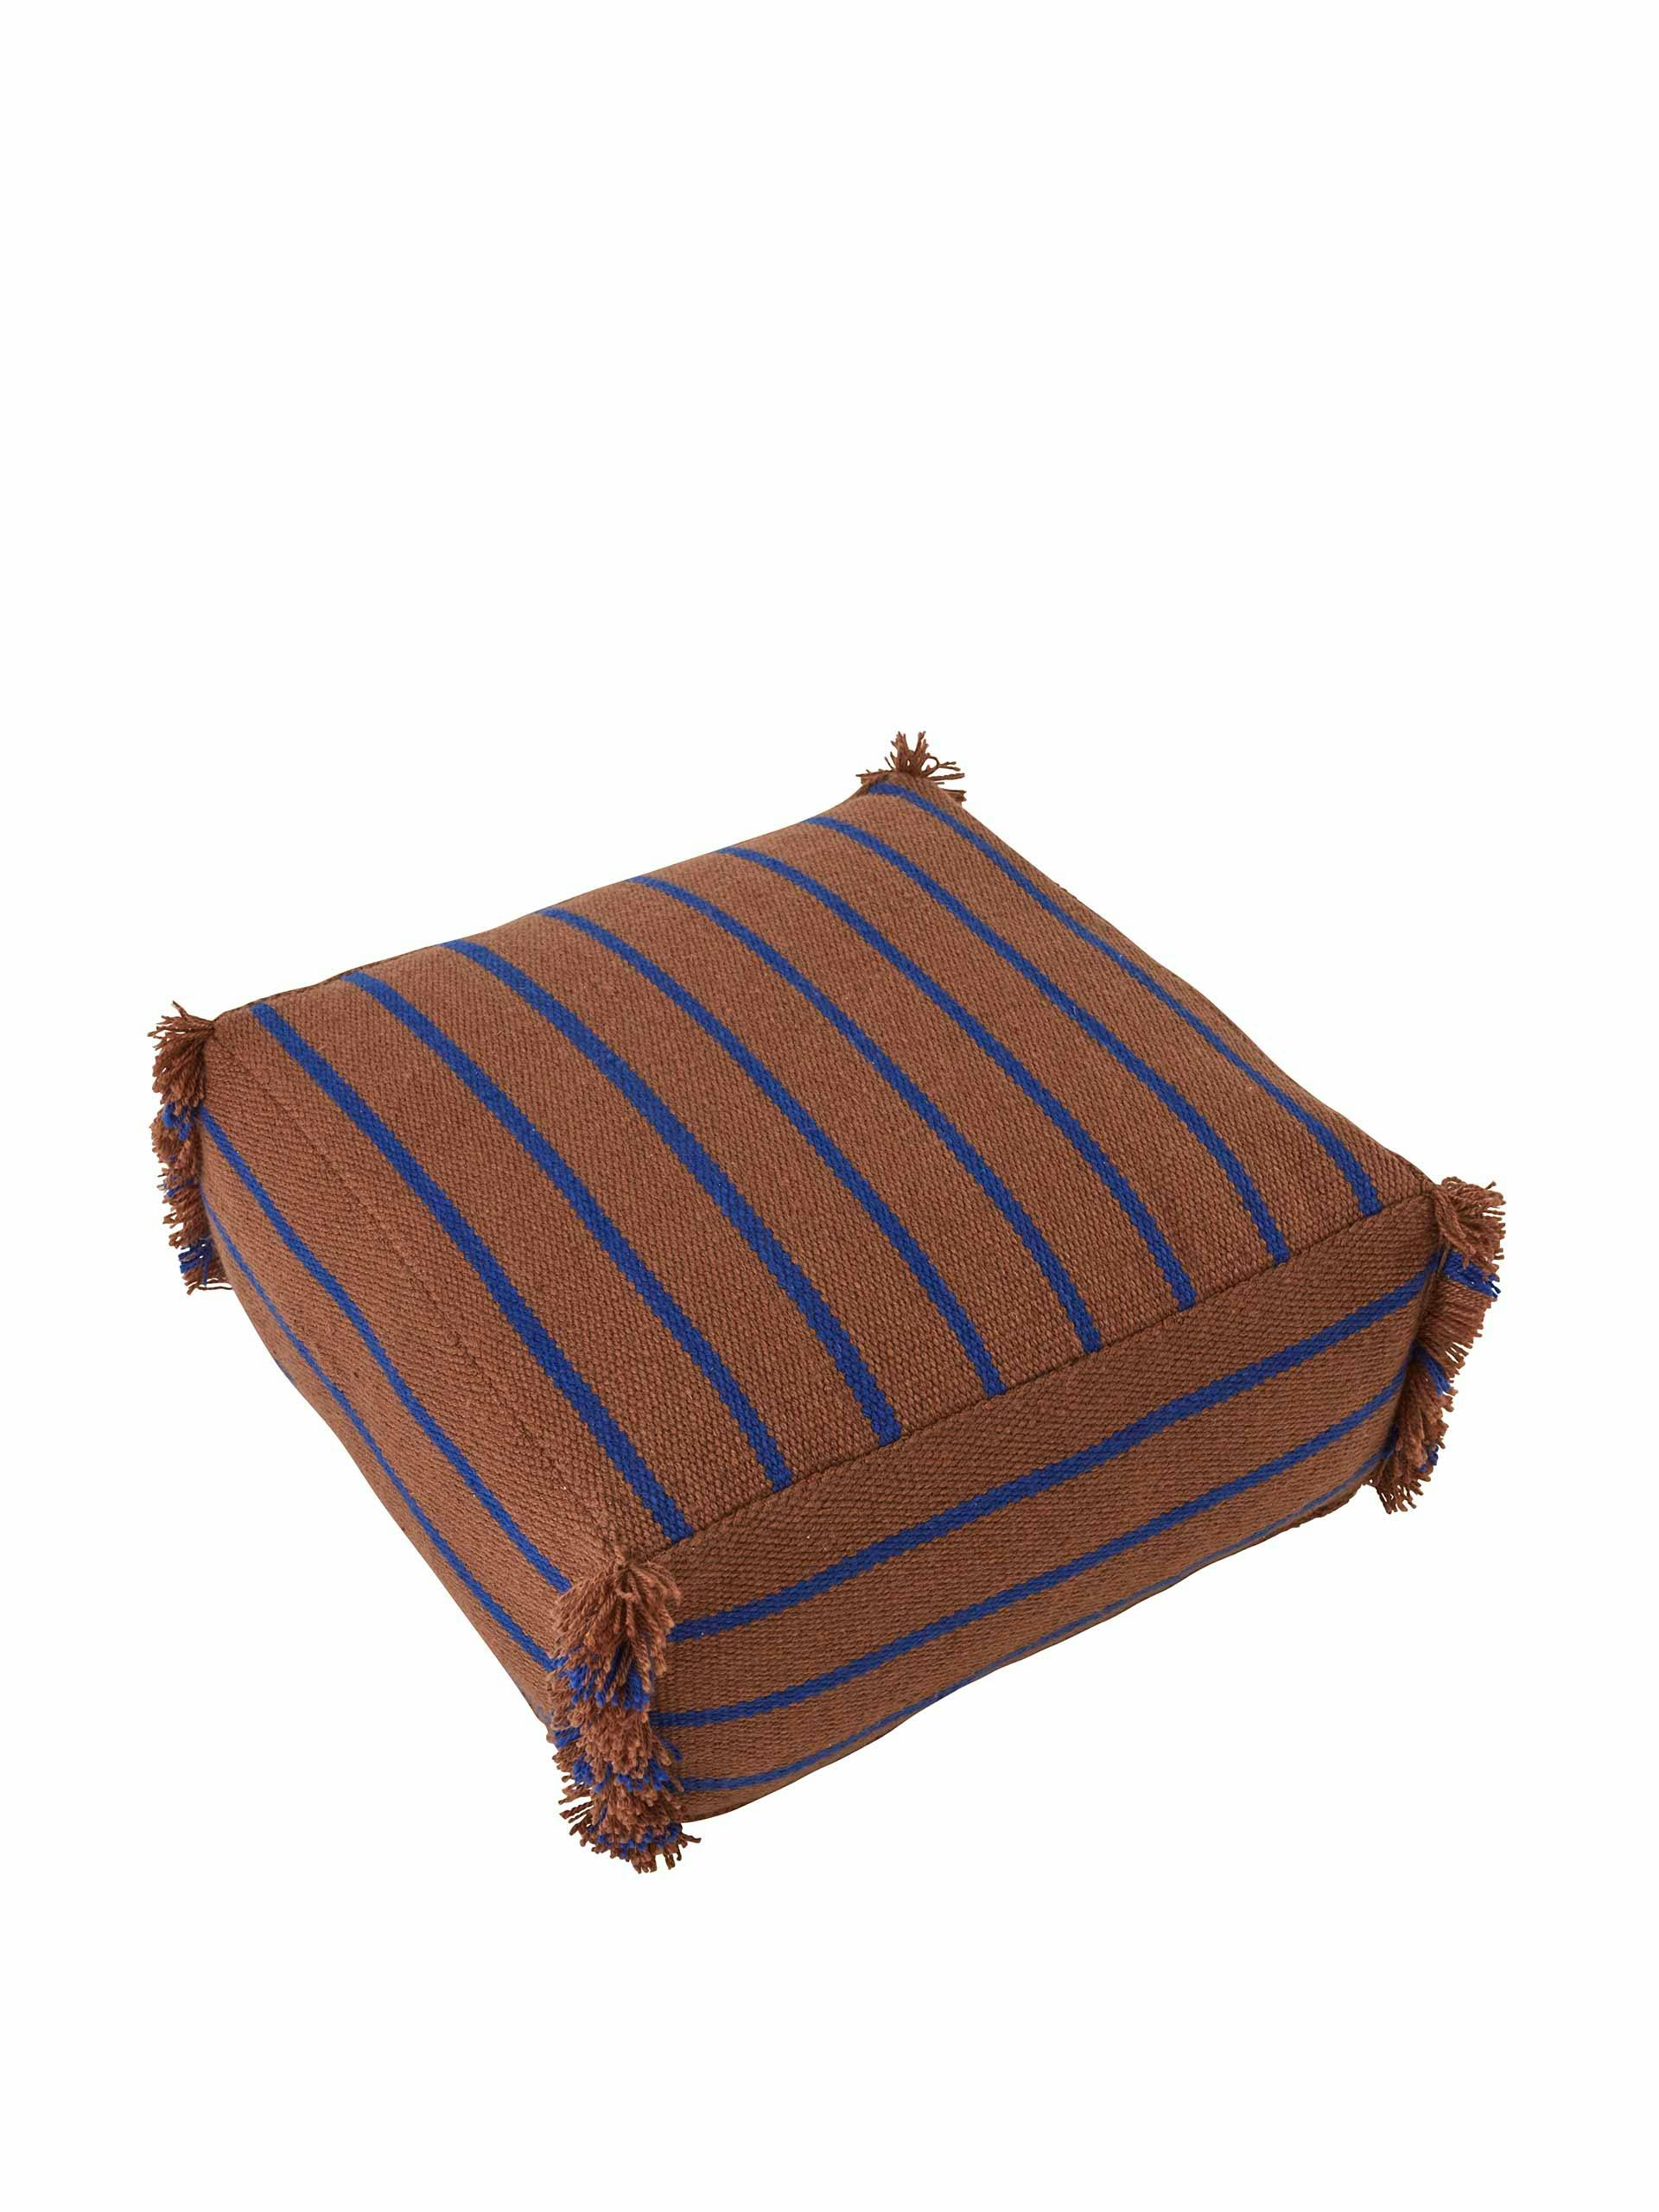 Lina recycled-fabric pouf in Choko